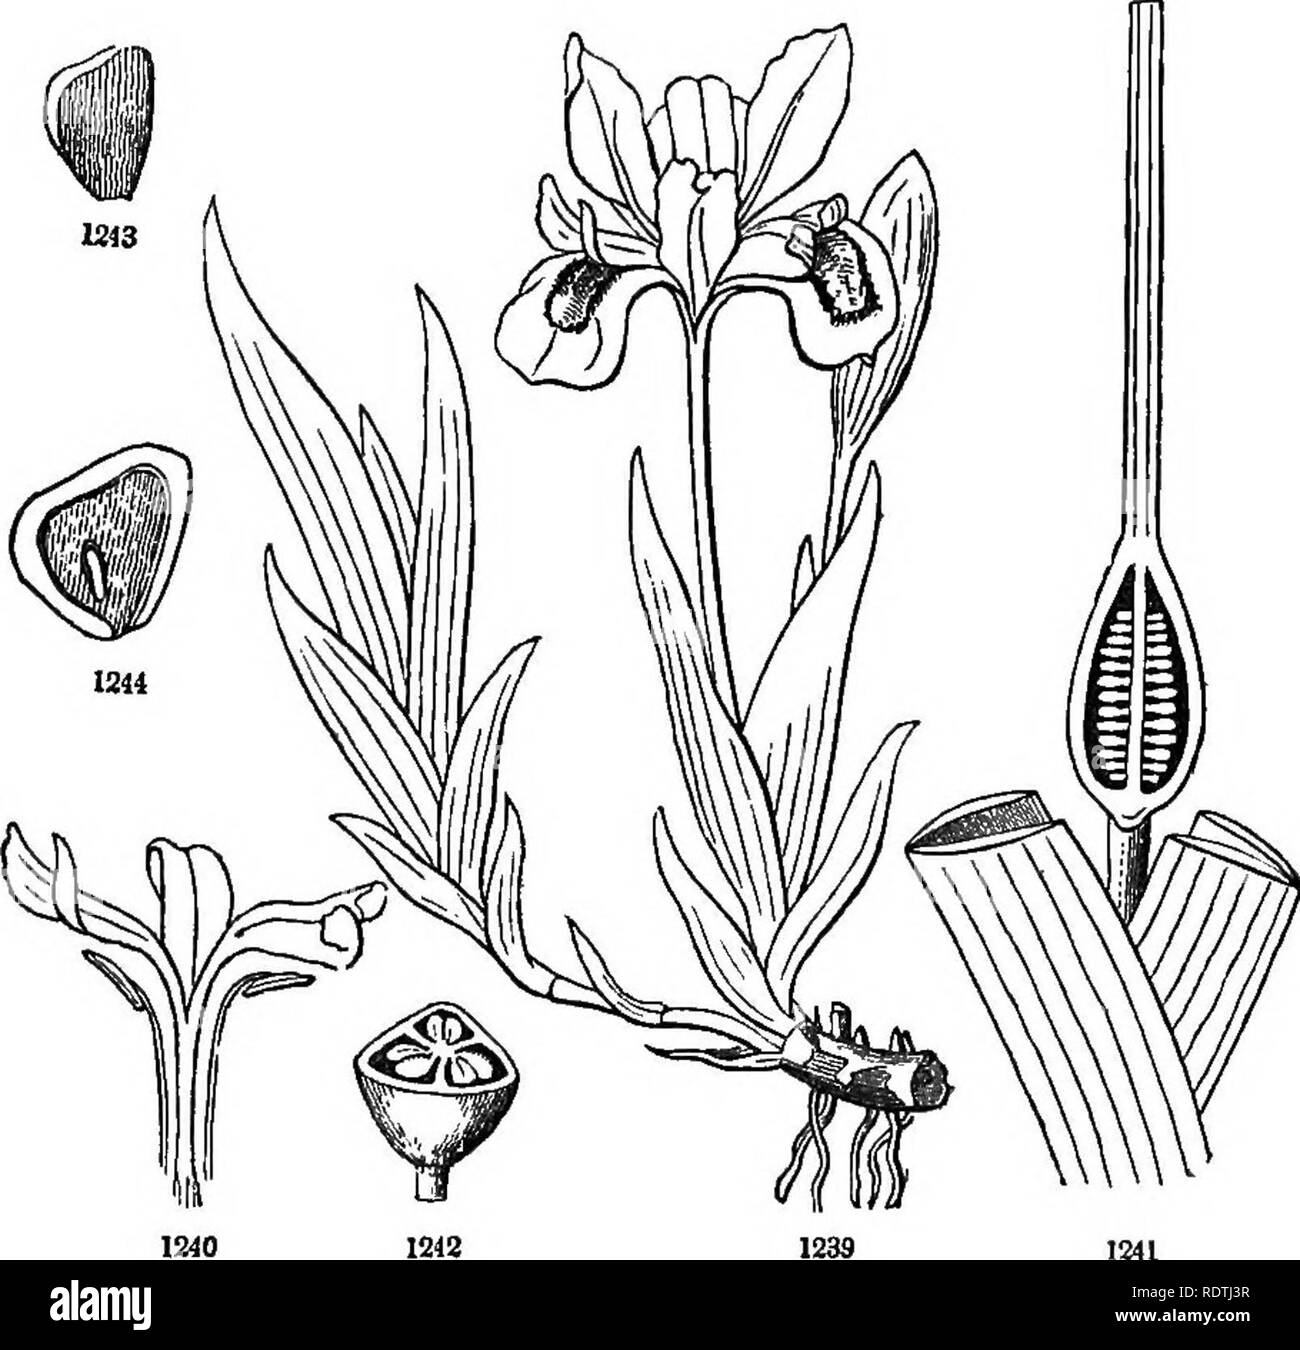 . Introduction to structural and systematic botany, and vegetable physiology. Botany. ENDOGENOUS OK MONOCOTYLEDONOUS PLANTS. 491 corms, &amp;c. contain starch, with some volatile acrid matter. Those of Iris cristata are very pungent; those of I. versicolor, &amp;c. are. drastic. Orris-root is the dried rhizoma of Iris florentina, of South- ern Europe. The true Saffron consists of the dried orange-colored stigmas of Crocus sativus. 943. Ord. Amaryllldacea; {Amaryllis Family). Bulbous plants (sometimes with fibrous roots), bearing showy flowers mostly on scapes. Perianth regular, or nearly so; t Stock Photo